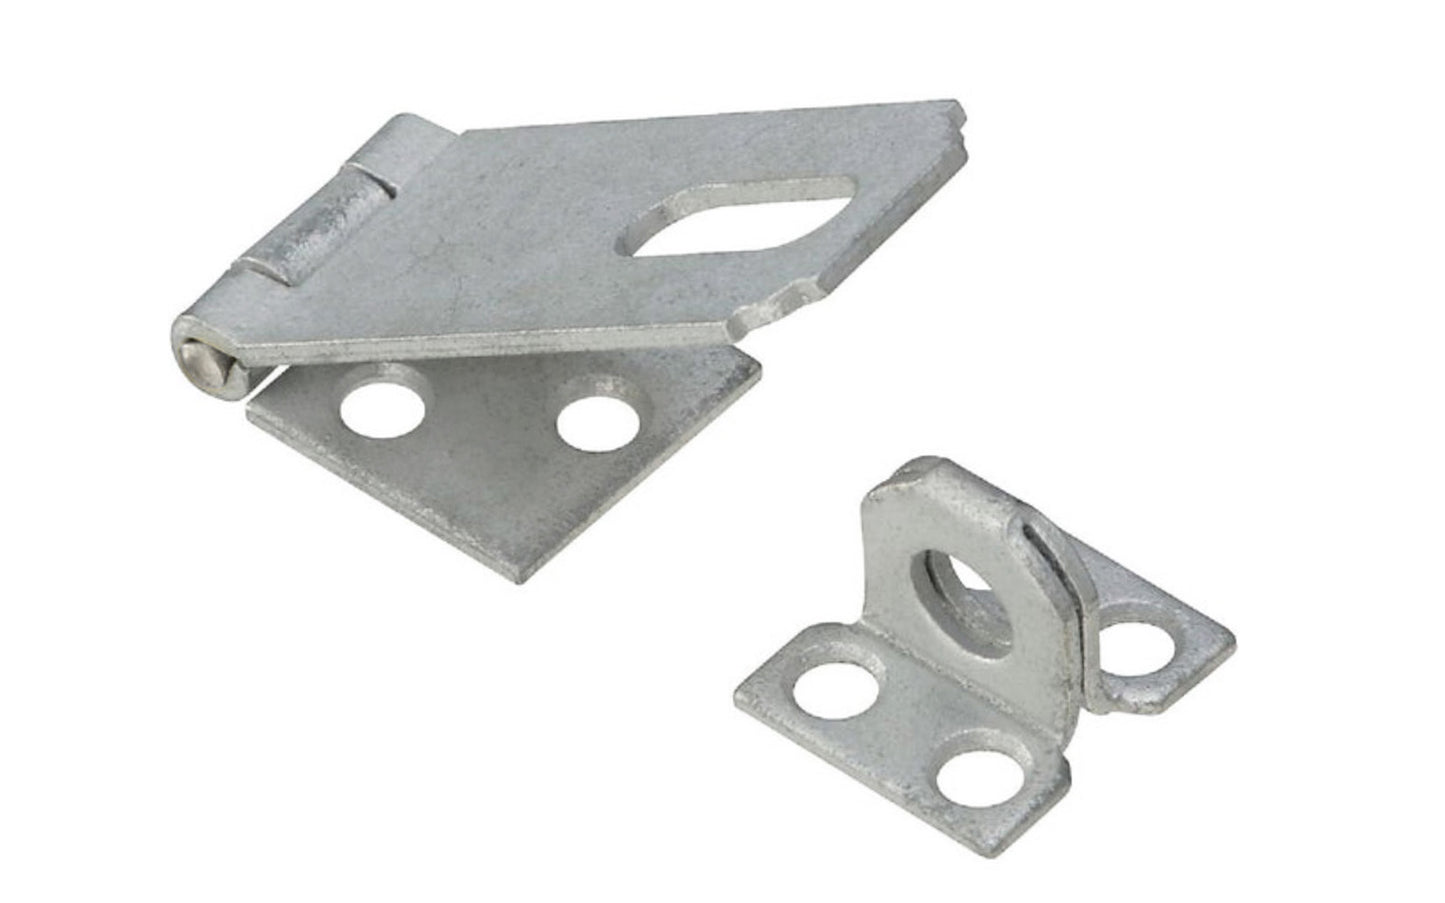 2-1/2" galvanized coated steel safety hasp is designed to secure a wide variety of cabinets, small doors, boxes, trunks. Includes a rigid, non-swivel staple. For security, all screws are concealed when hasp is closed. Manufactured from hot rolled steel for durability.  National Hardware Model N102-723. 038613102149. 